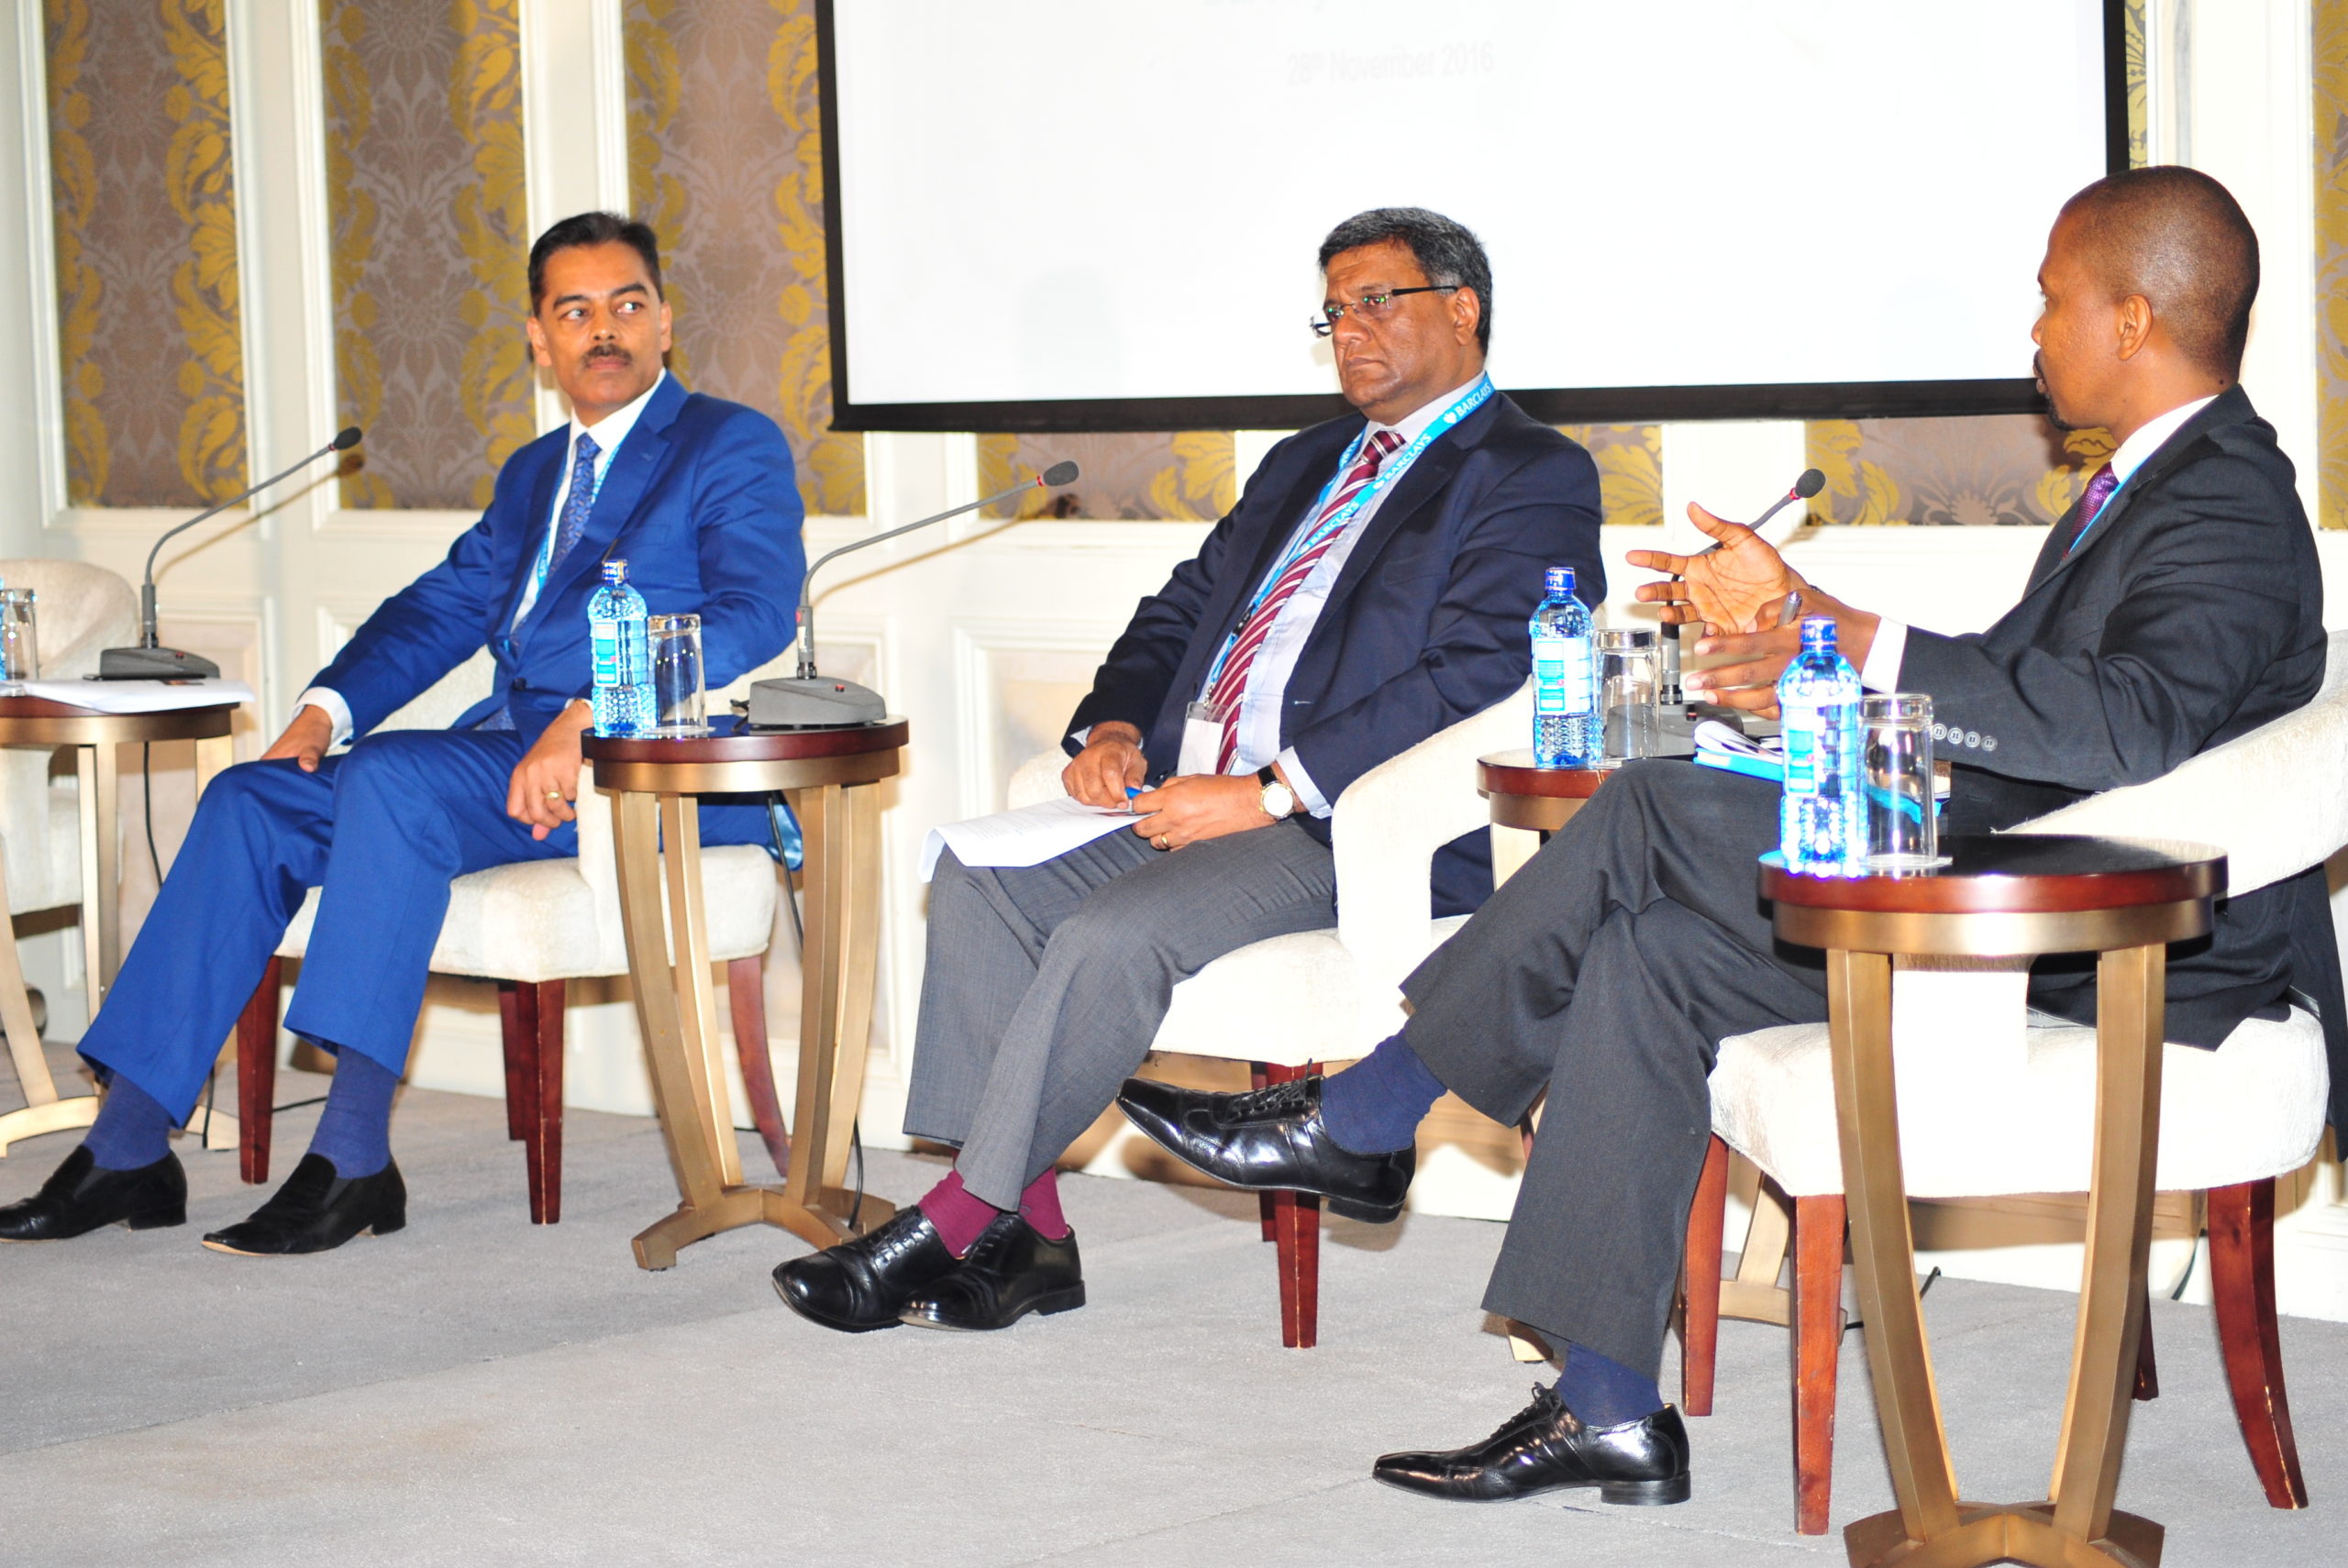 Panelists at recently concluded Barclays Africa Forum (From left Vimal Shah CEO Bidco Africa, Karim Dostmohamed CEO Frigoken Ltd and KeaObaka Mahuma, Head of Enterprise Supply Chain Development, Barclays Africa Group)